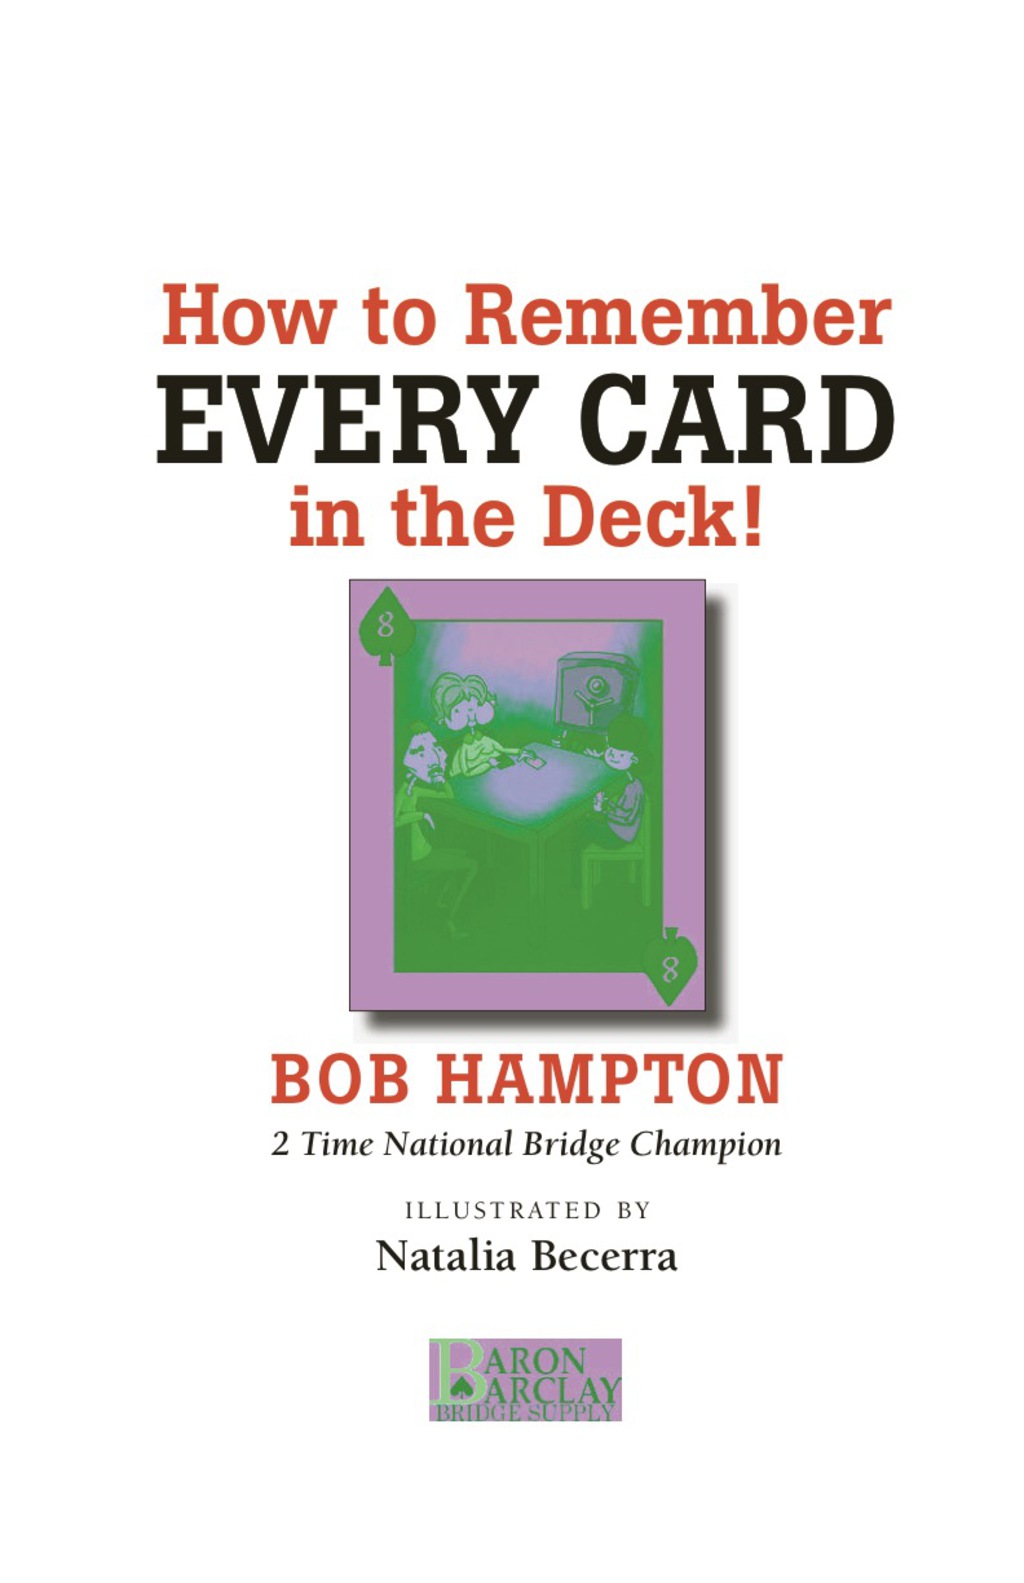 How to Remember Every Card in the Deck (eBook) - Bob Hampton,